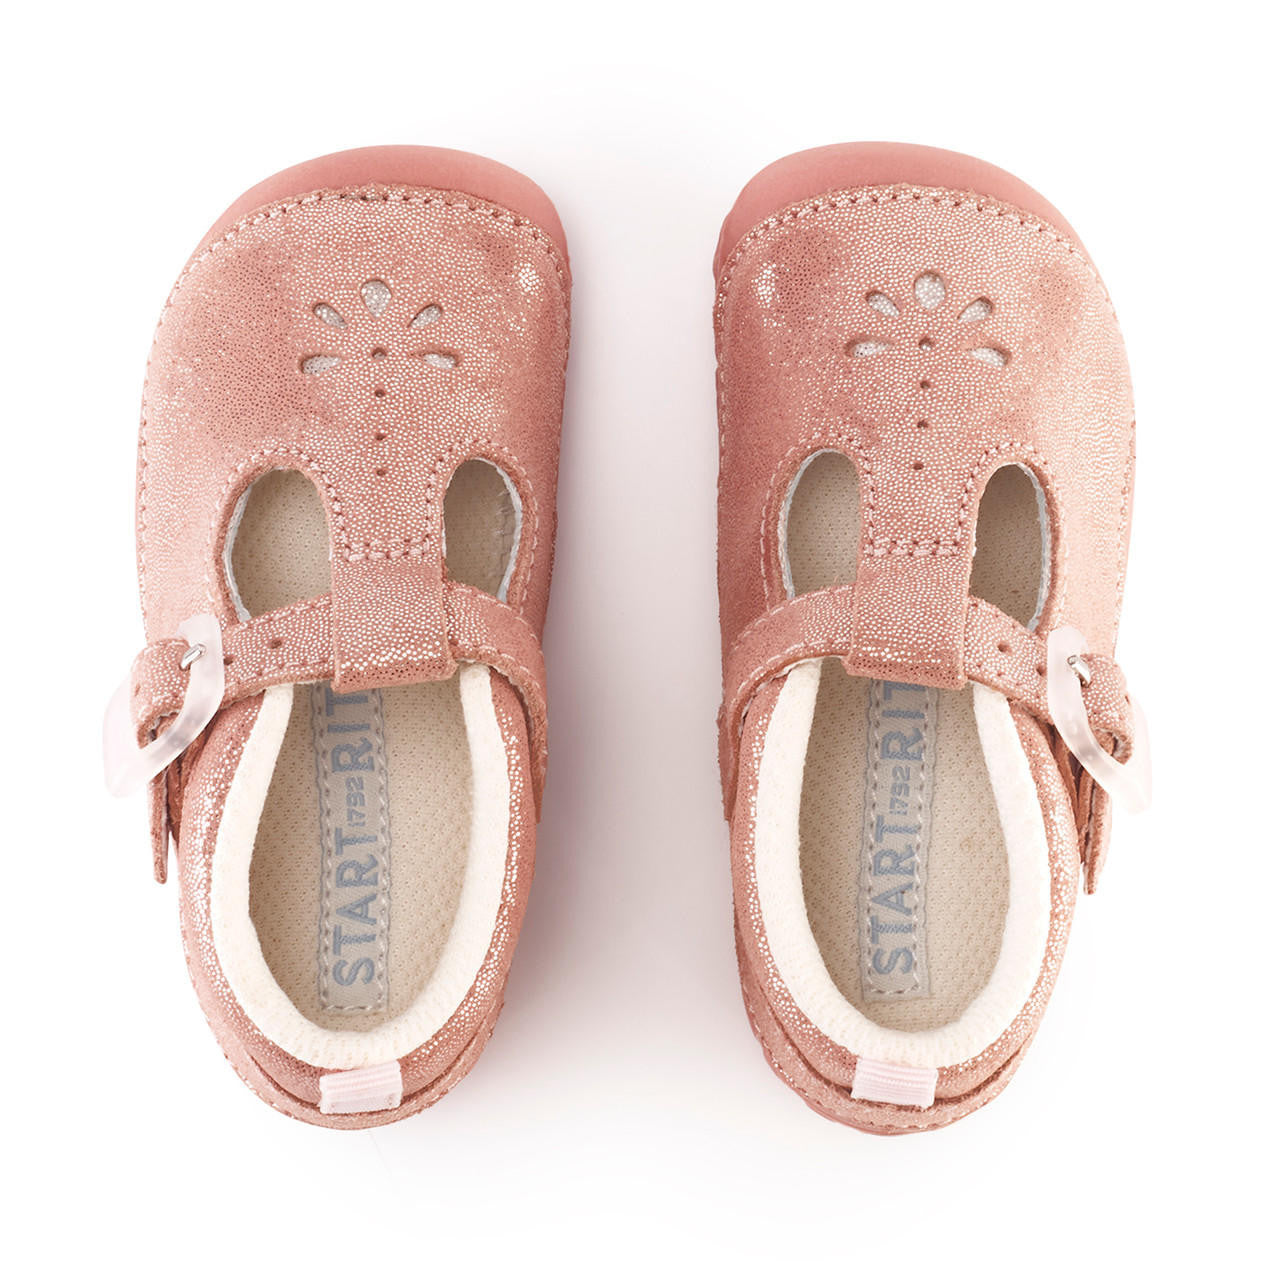 A girls pre-walker by Start-Rite, style Baby Bubble in coral glitter, with buckle fastening. Top view of a pair.